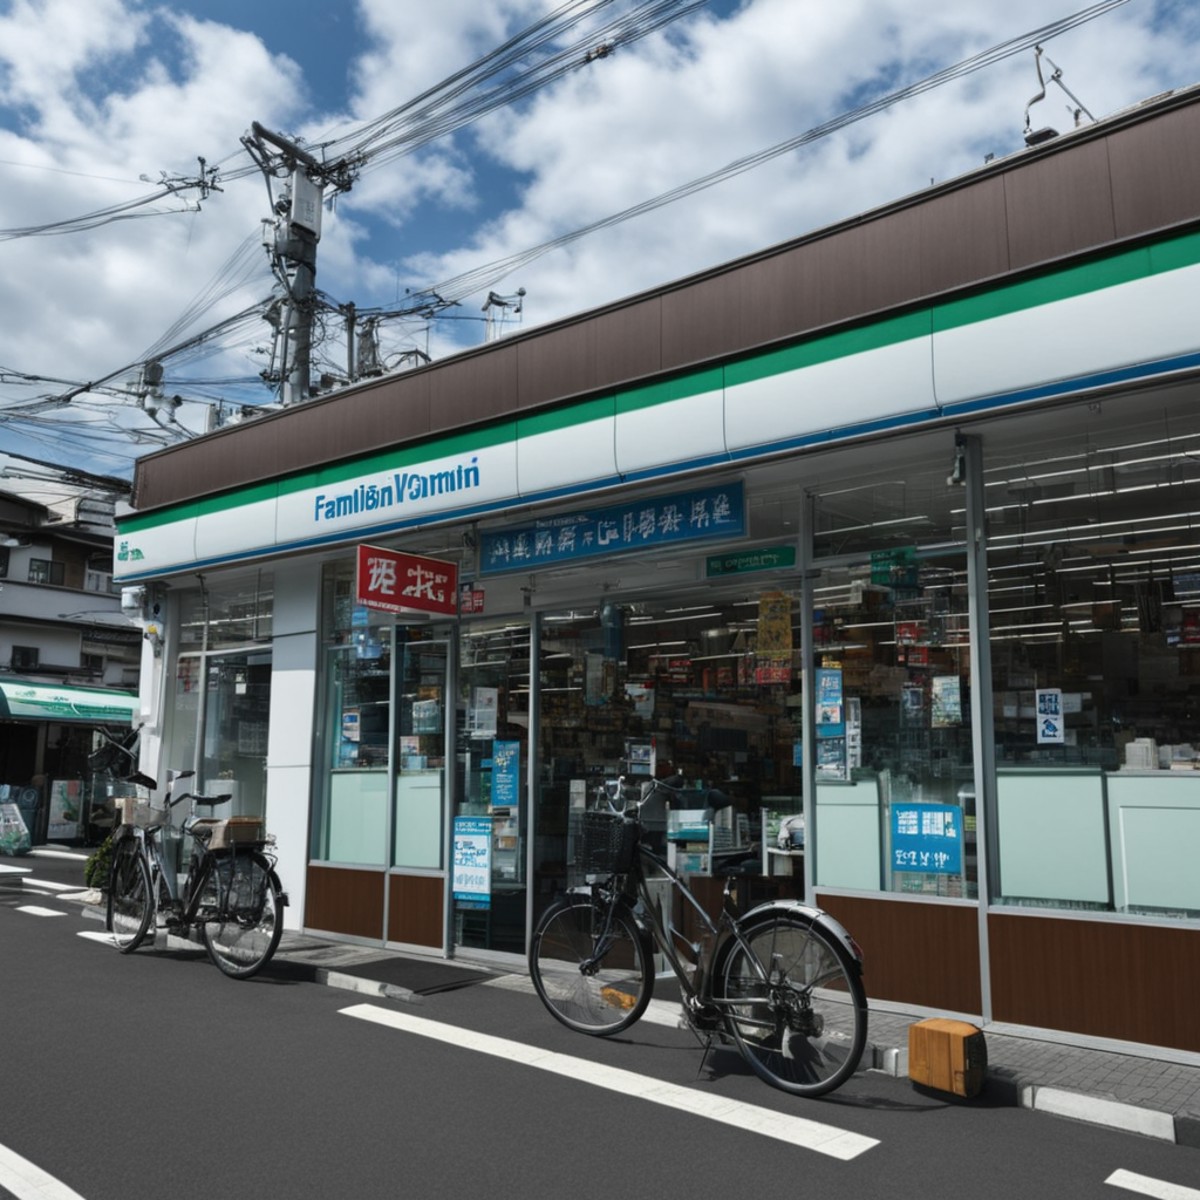 cinematic still best quality, ultra-detailed,
famima, konbini, scenery, storefront, bicycle, shop, convenience store, sky,...